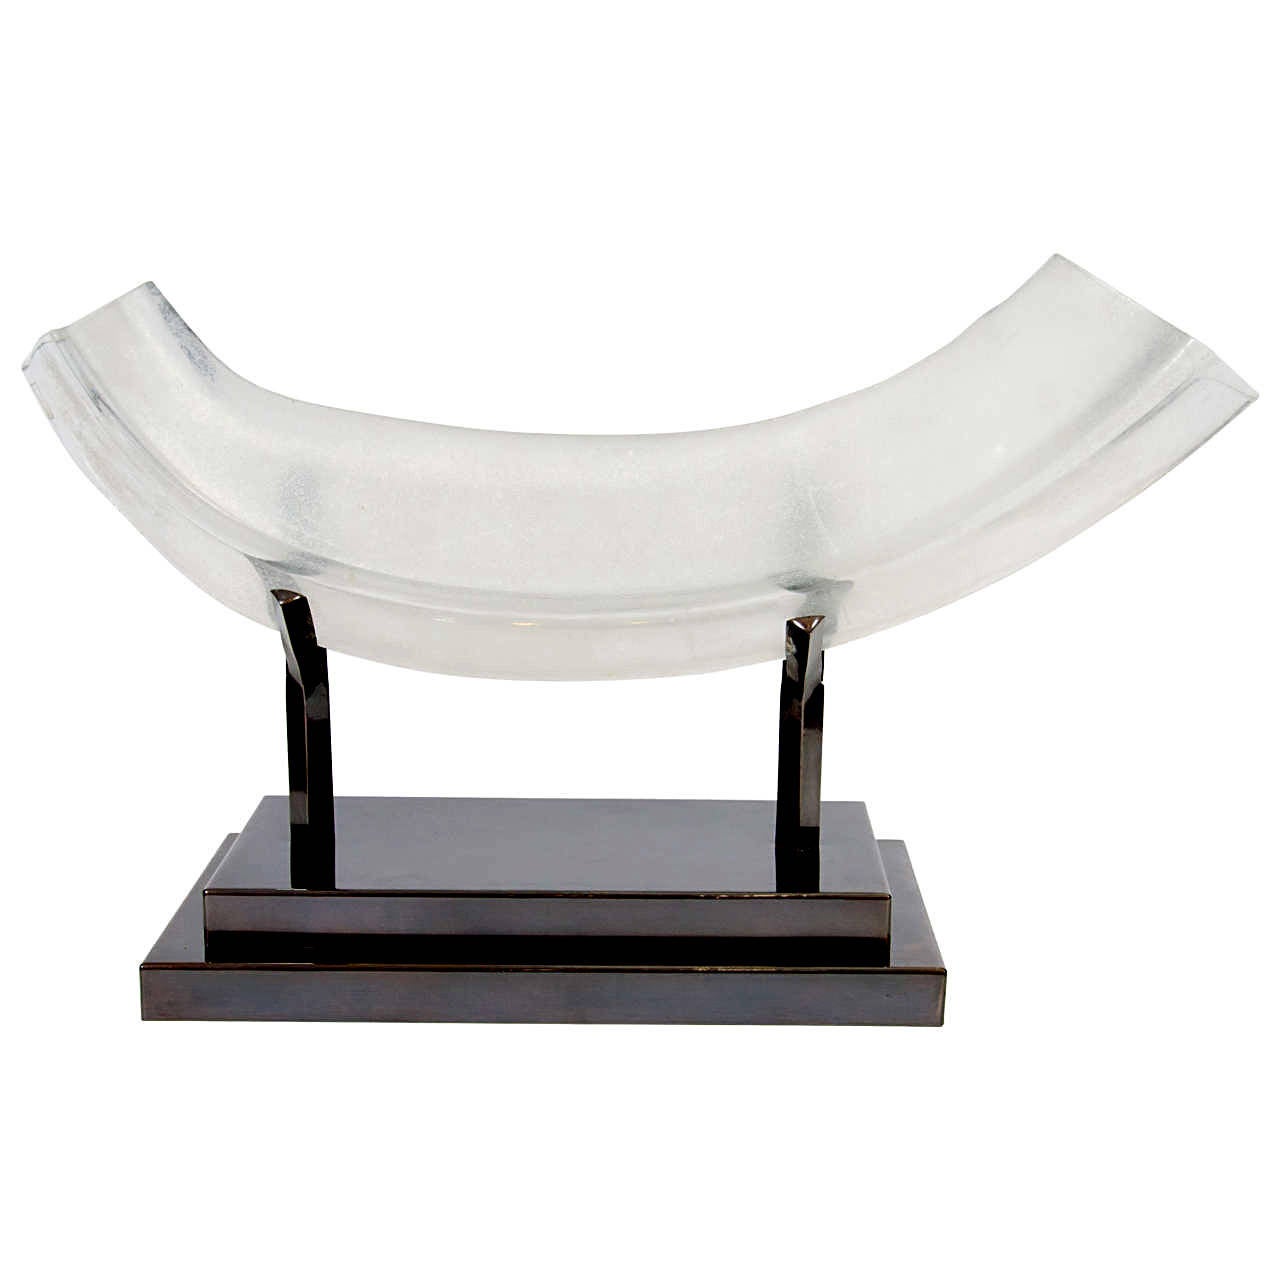 A Modern Glass Sculpture Attributed to Dorothe van Driel